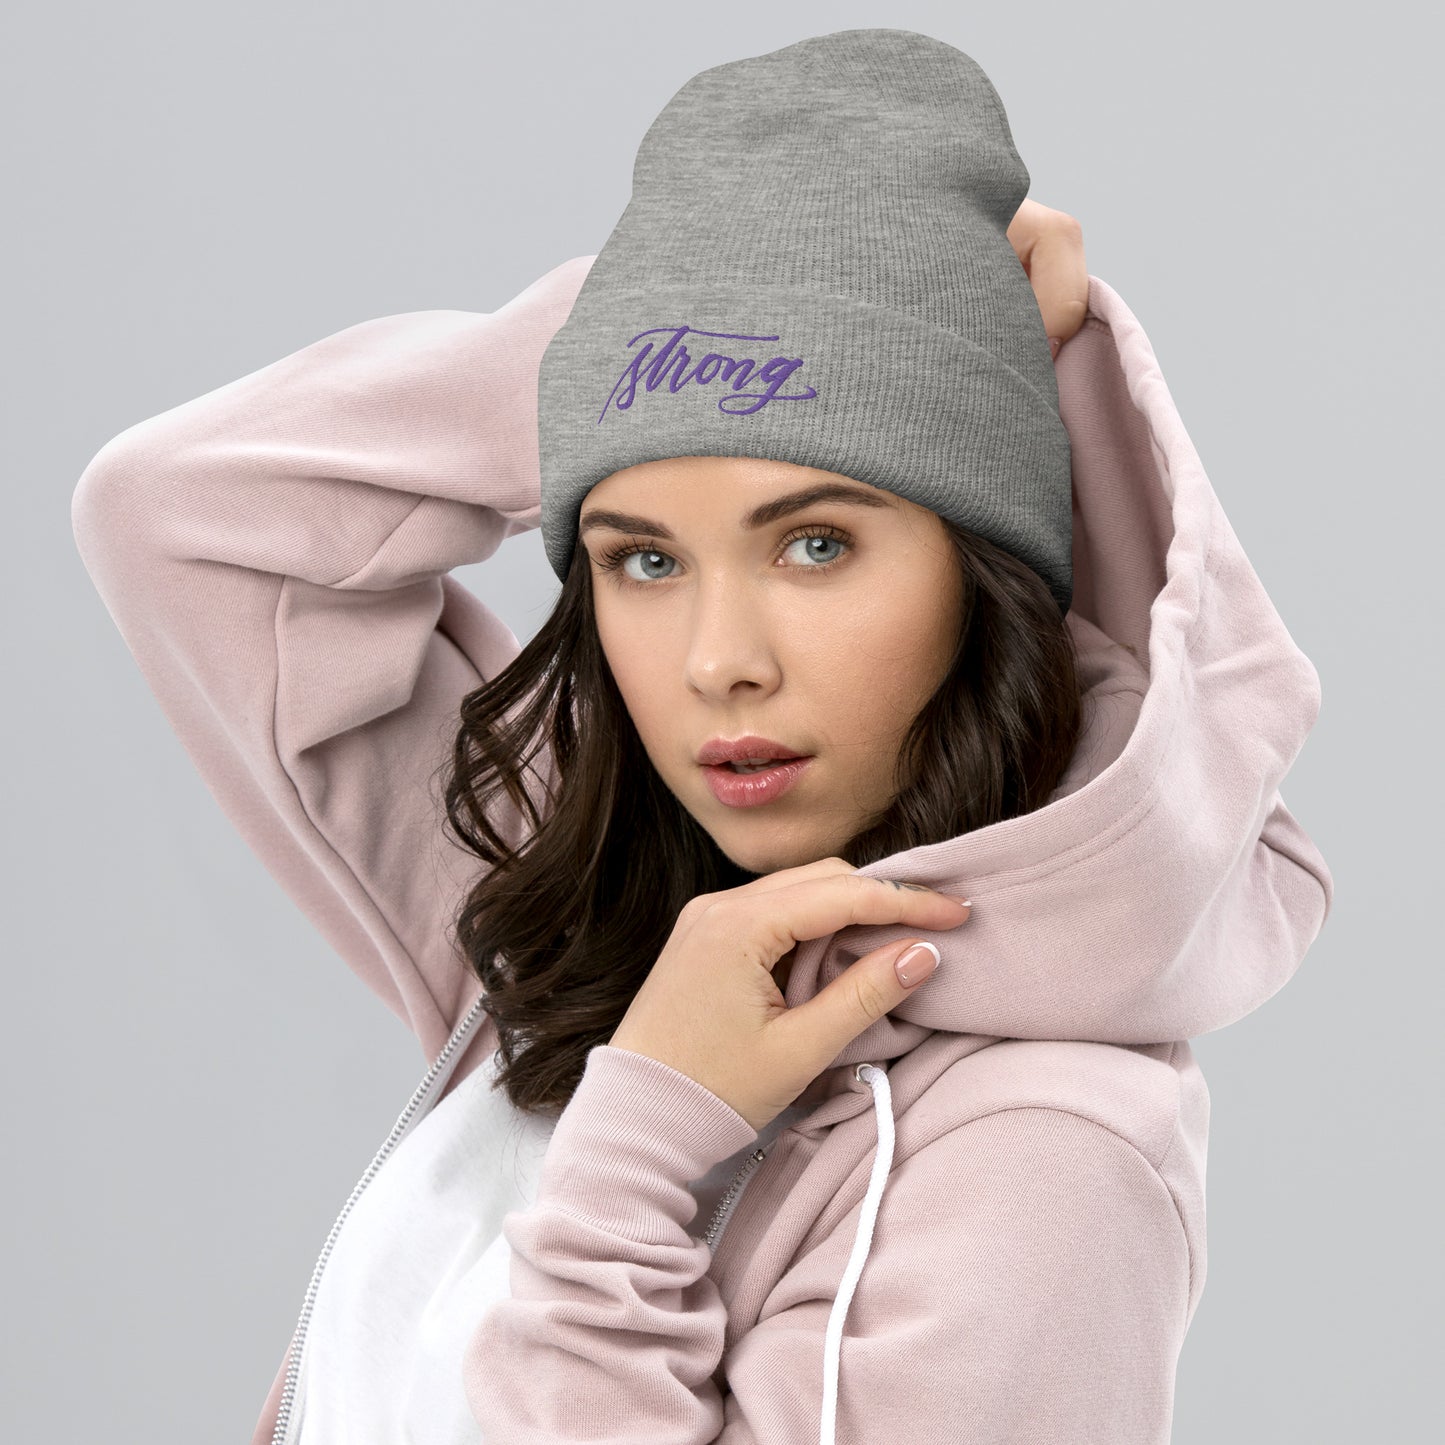 Embroidered Purple Script "Strong" Calligraphy on Black or Grey Cuffed Beanie